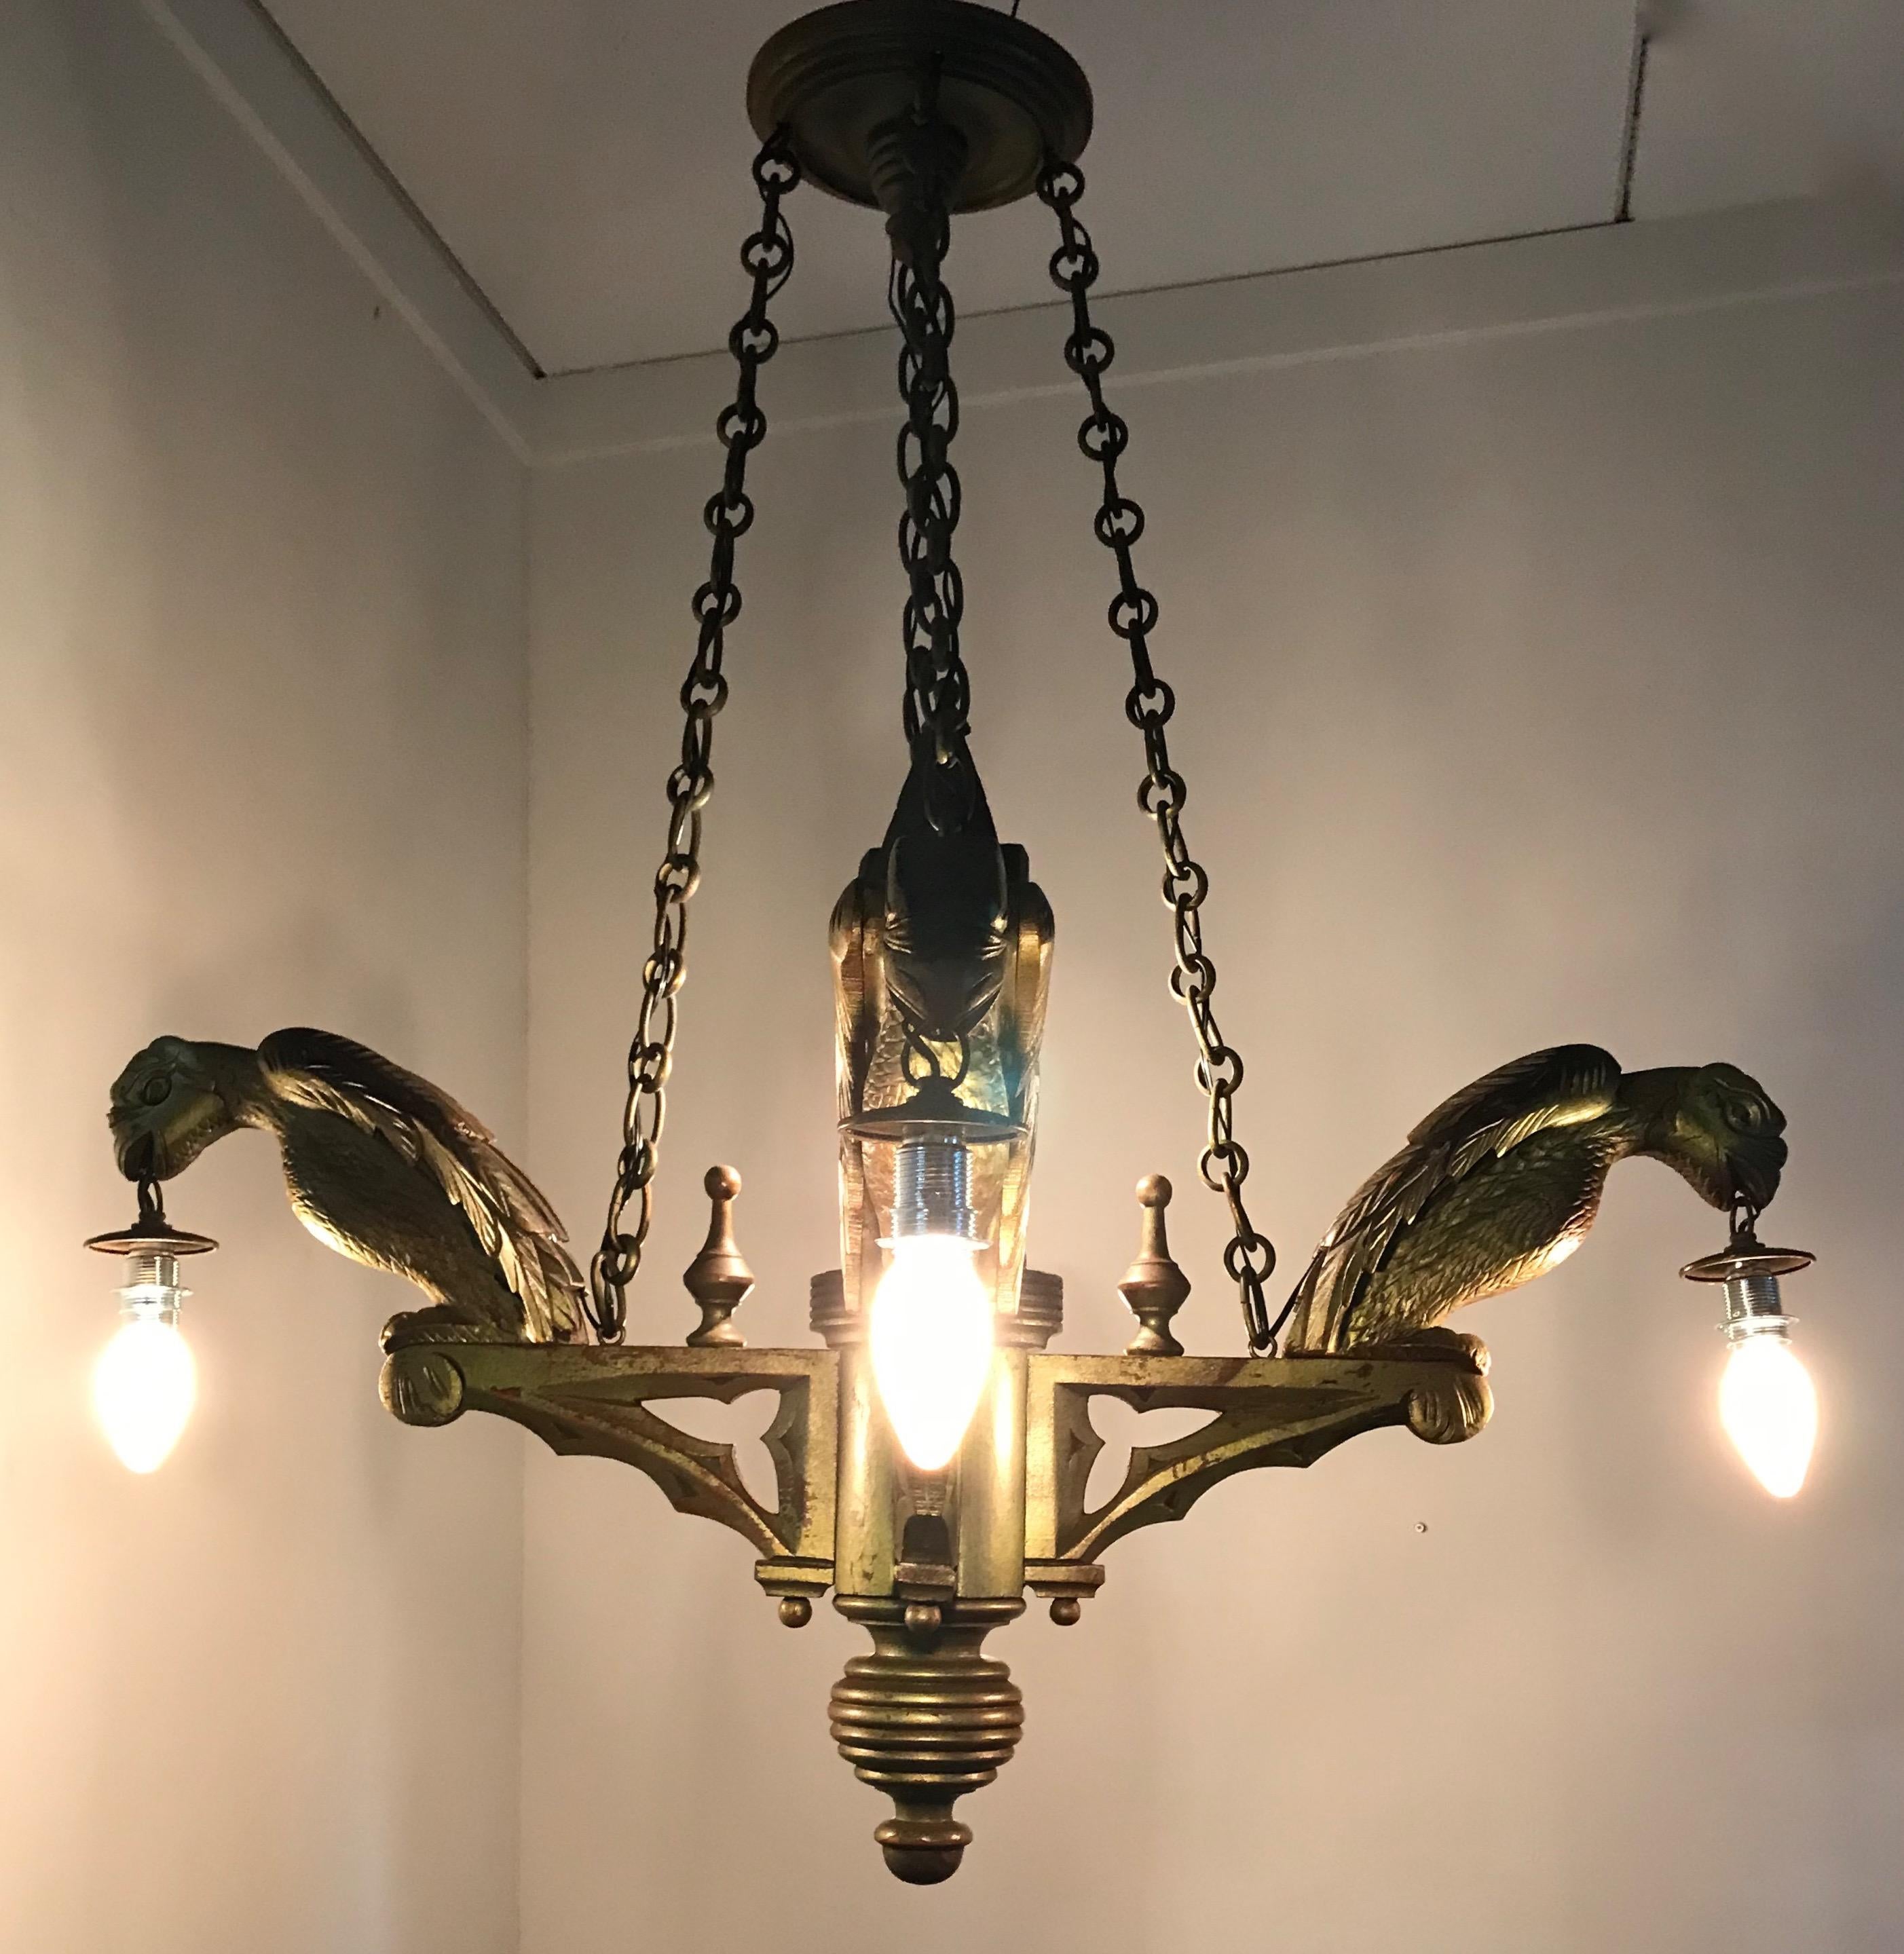 Rare Hand Carved Wooden Gothic Revival Art Chandelier with Gargoyle Sculptures For Sale 2